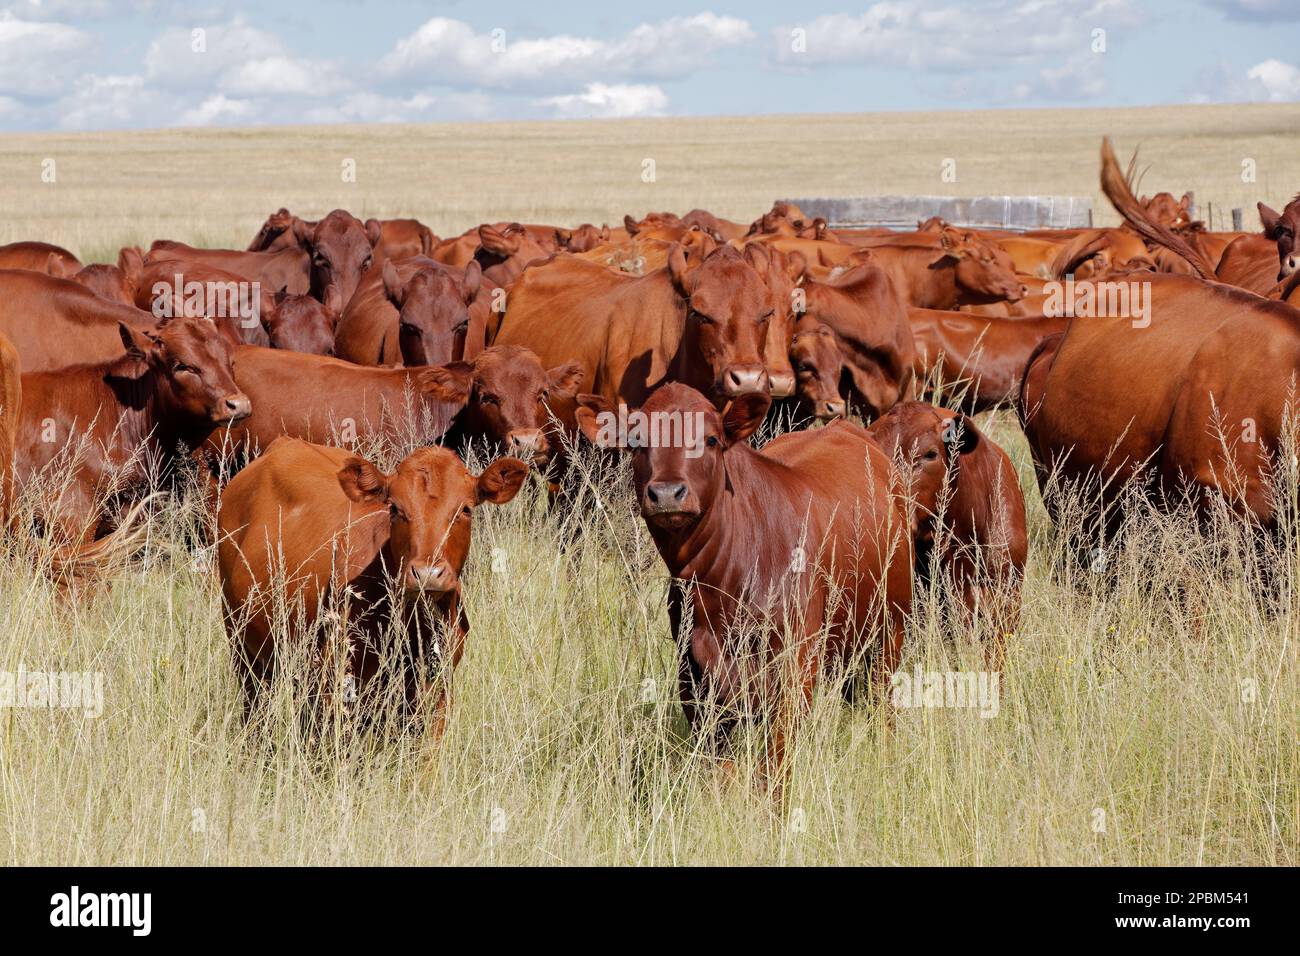 Herd of free-range cattle in grassland on a rural farm, South Africa Stock Photo